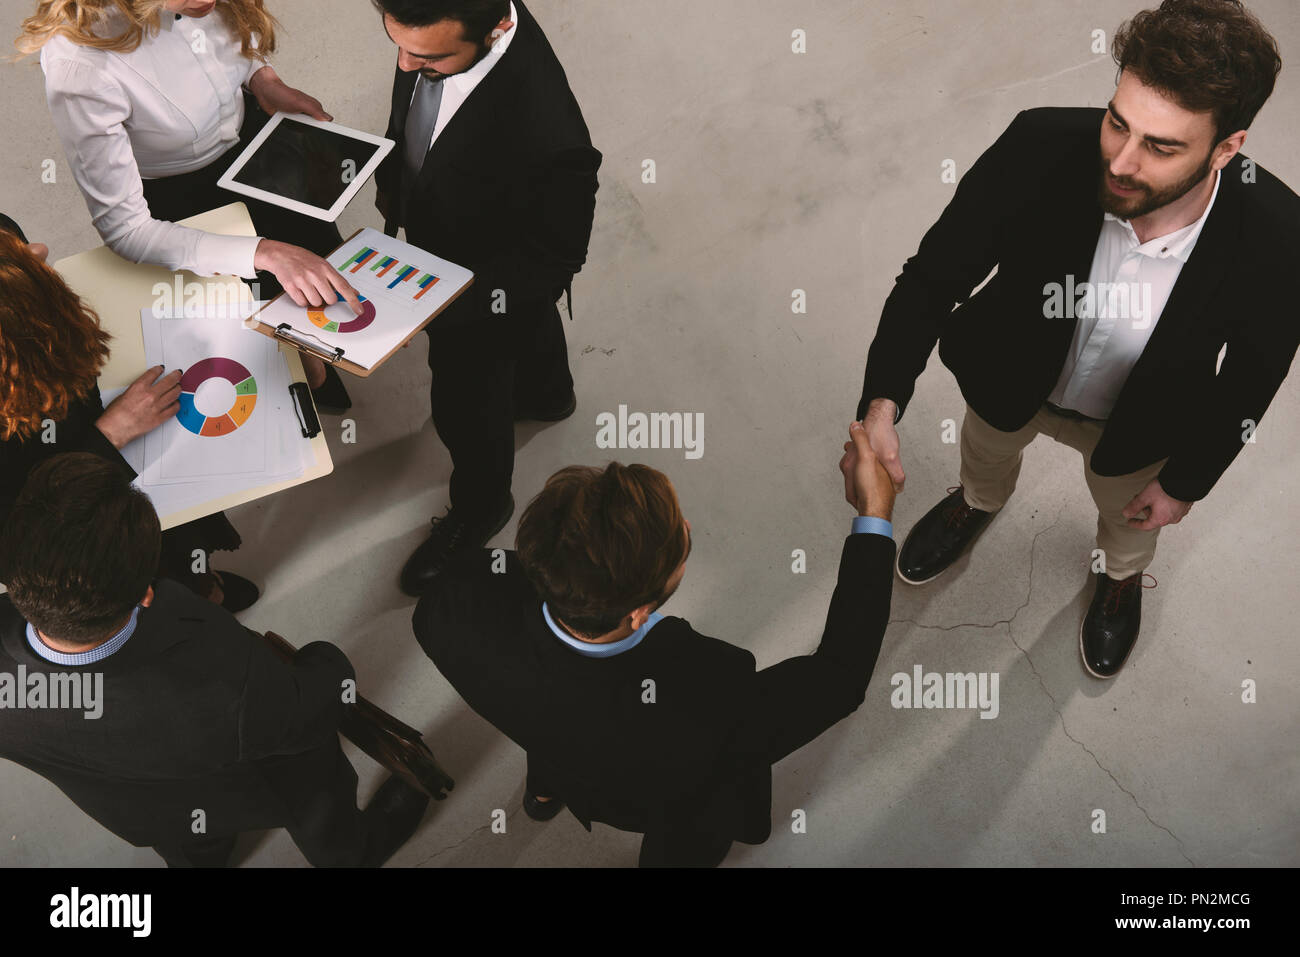 Handshaking business person in office. concept of teamwork and partnership Stock Photo